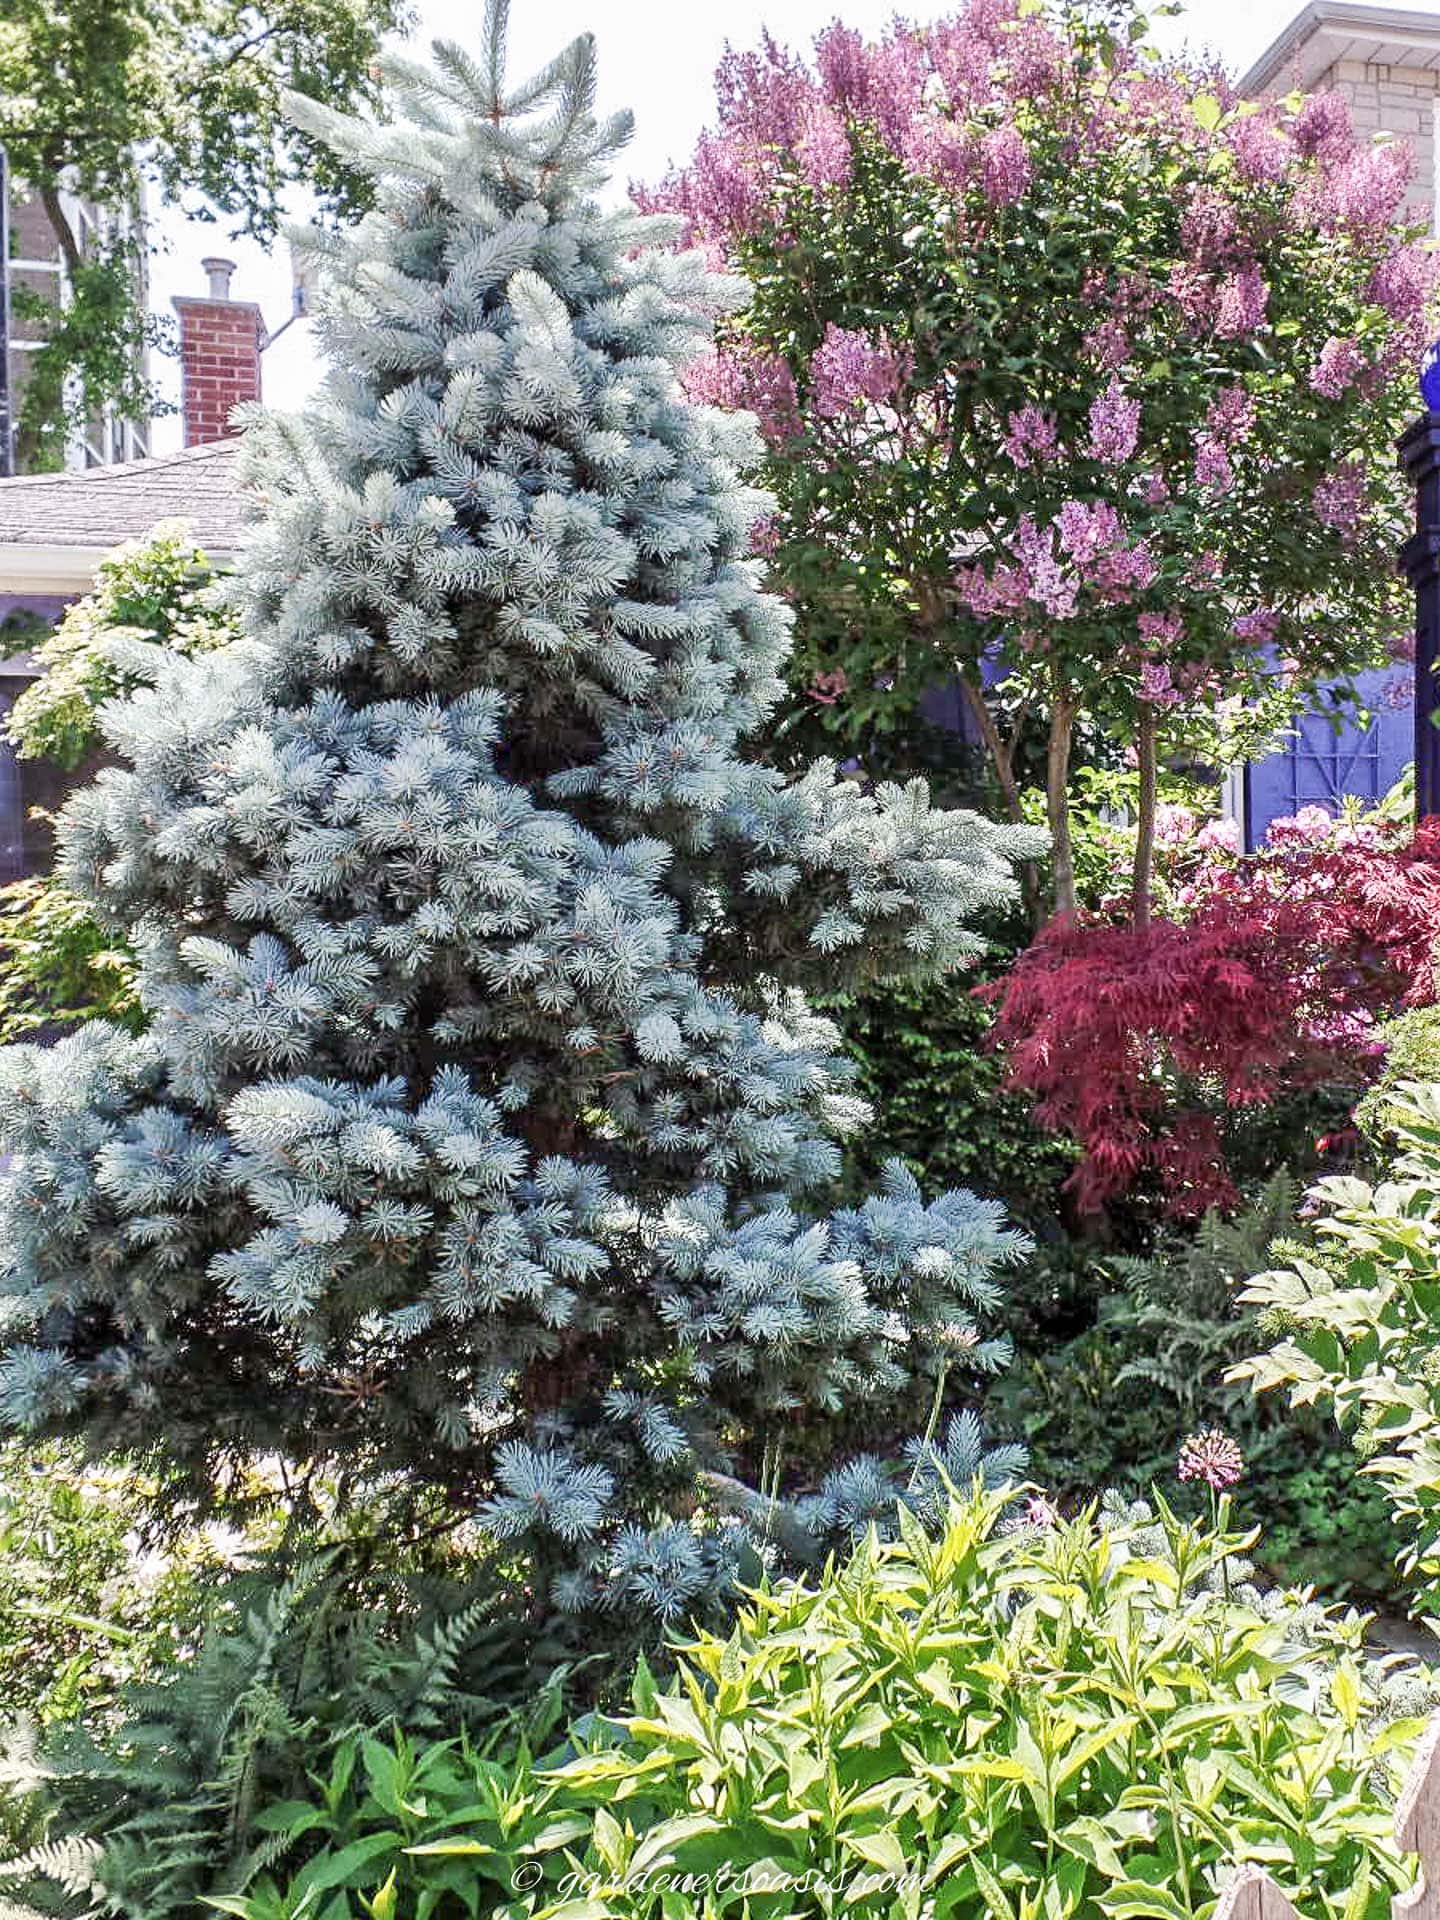 'Hoopsii' blue spruce beside a lilac and Japanese maple